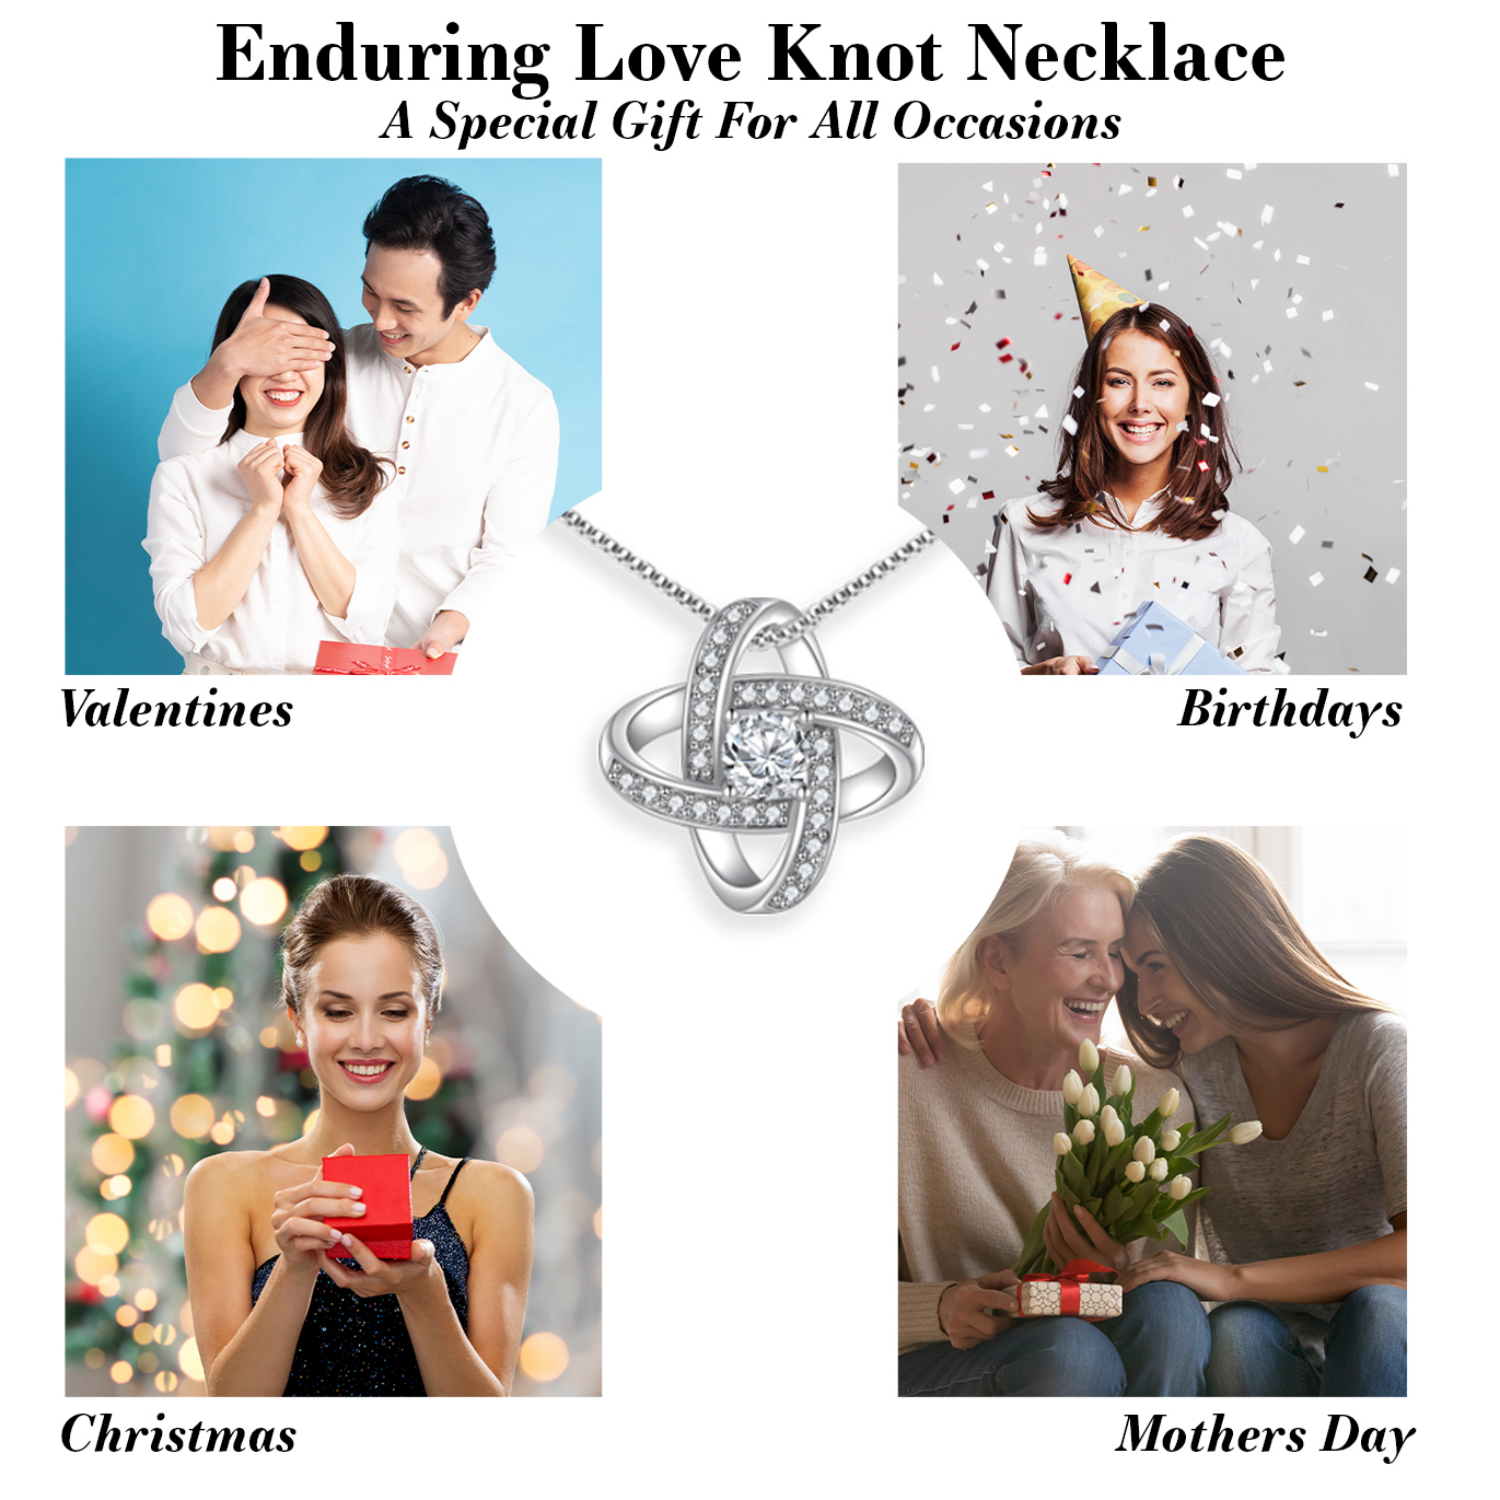 Personalized Necklaces + Message Cards - Jewelry With Personalized Heart Photo Message Card 